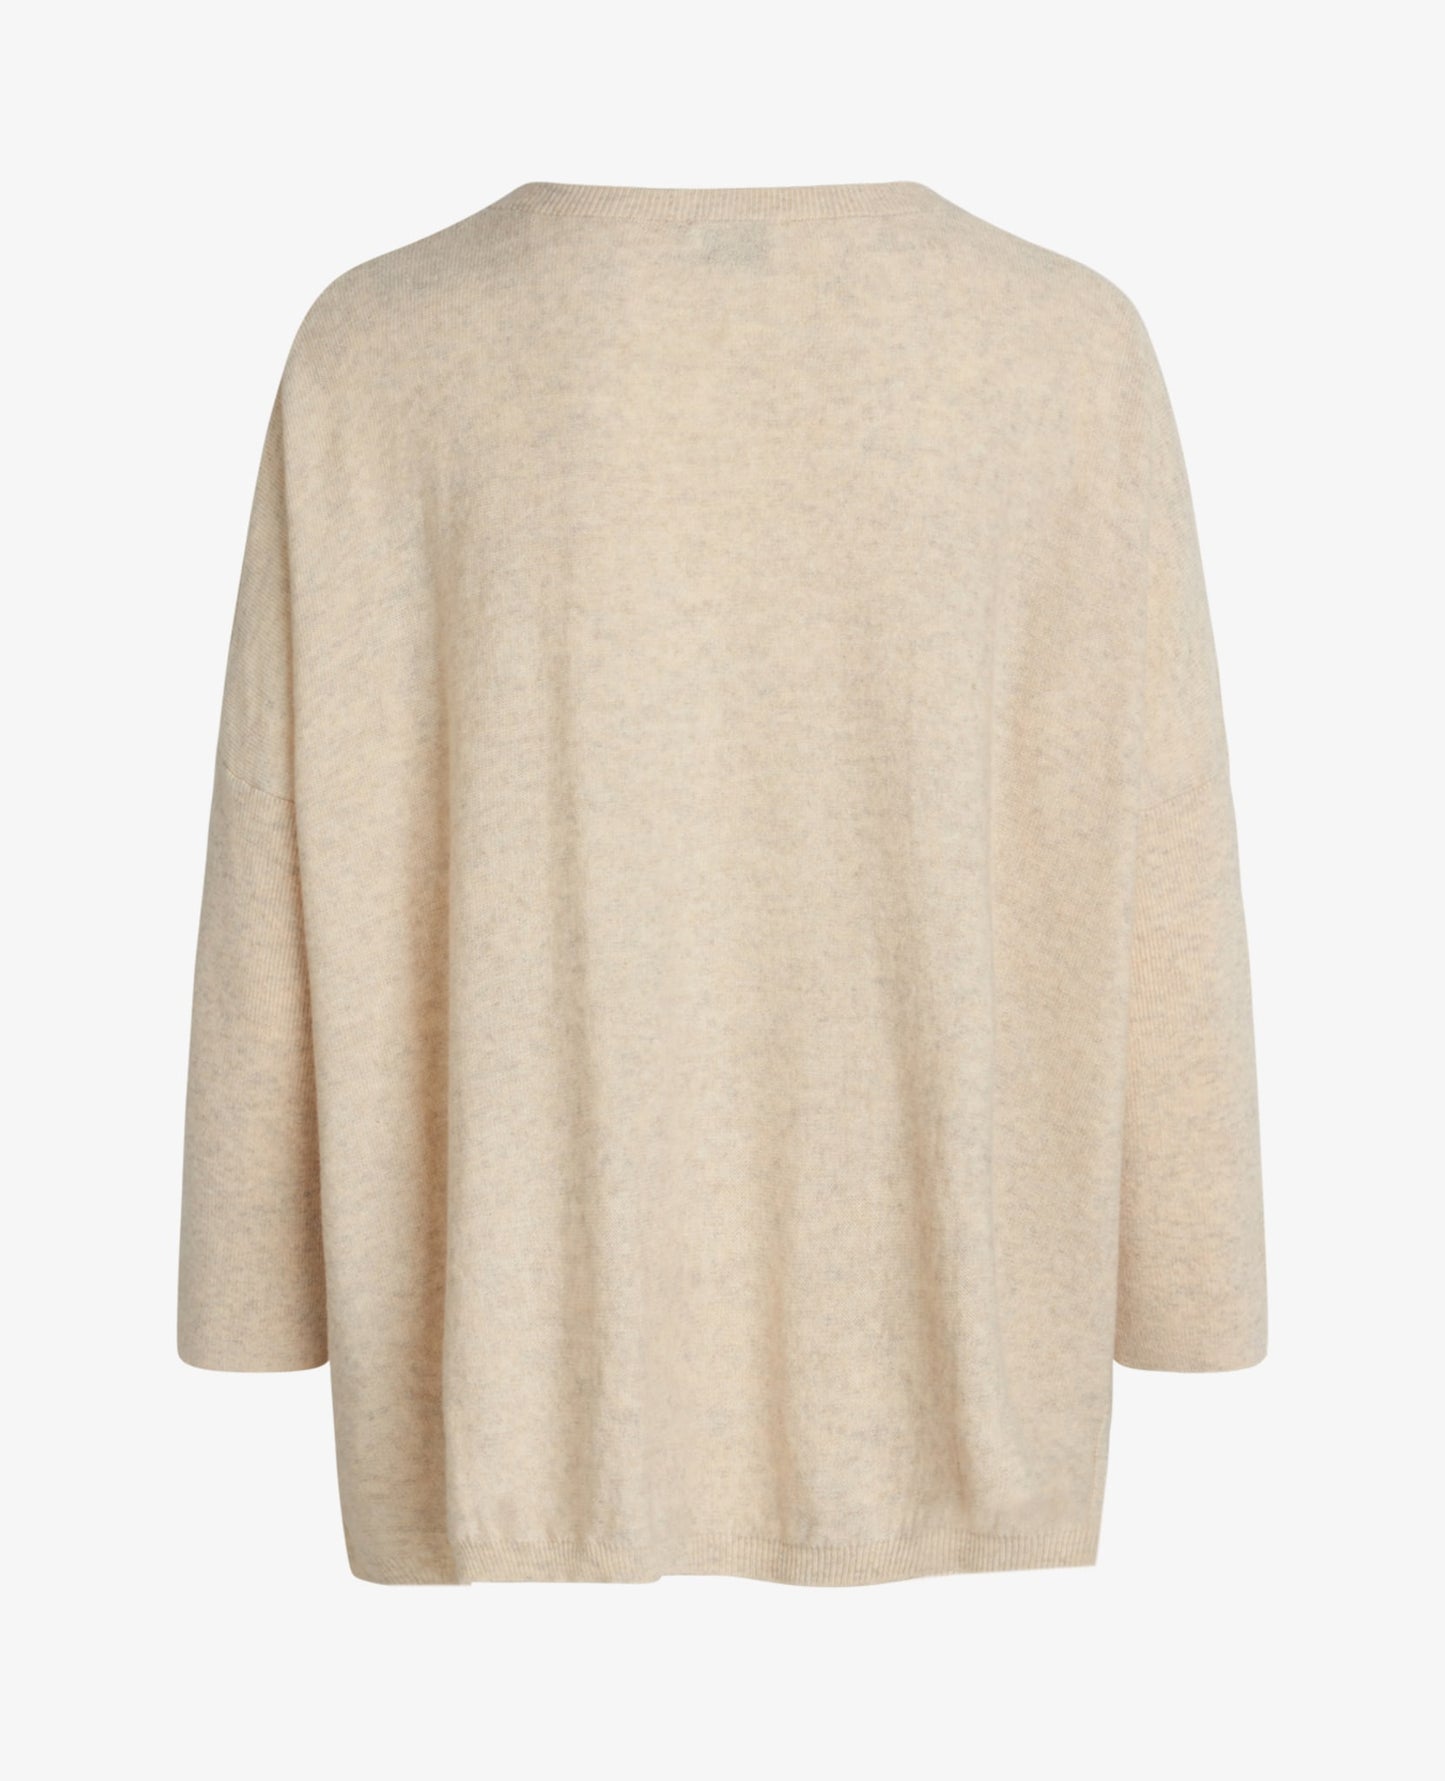 SOFT CASHMERE KNIT PULLOVER